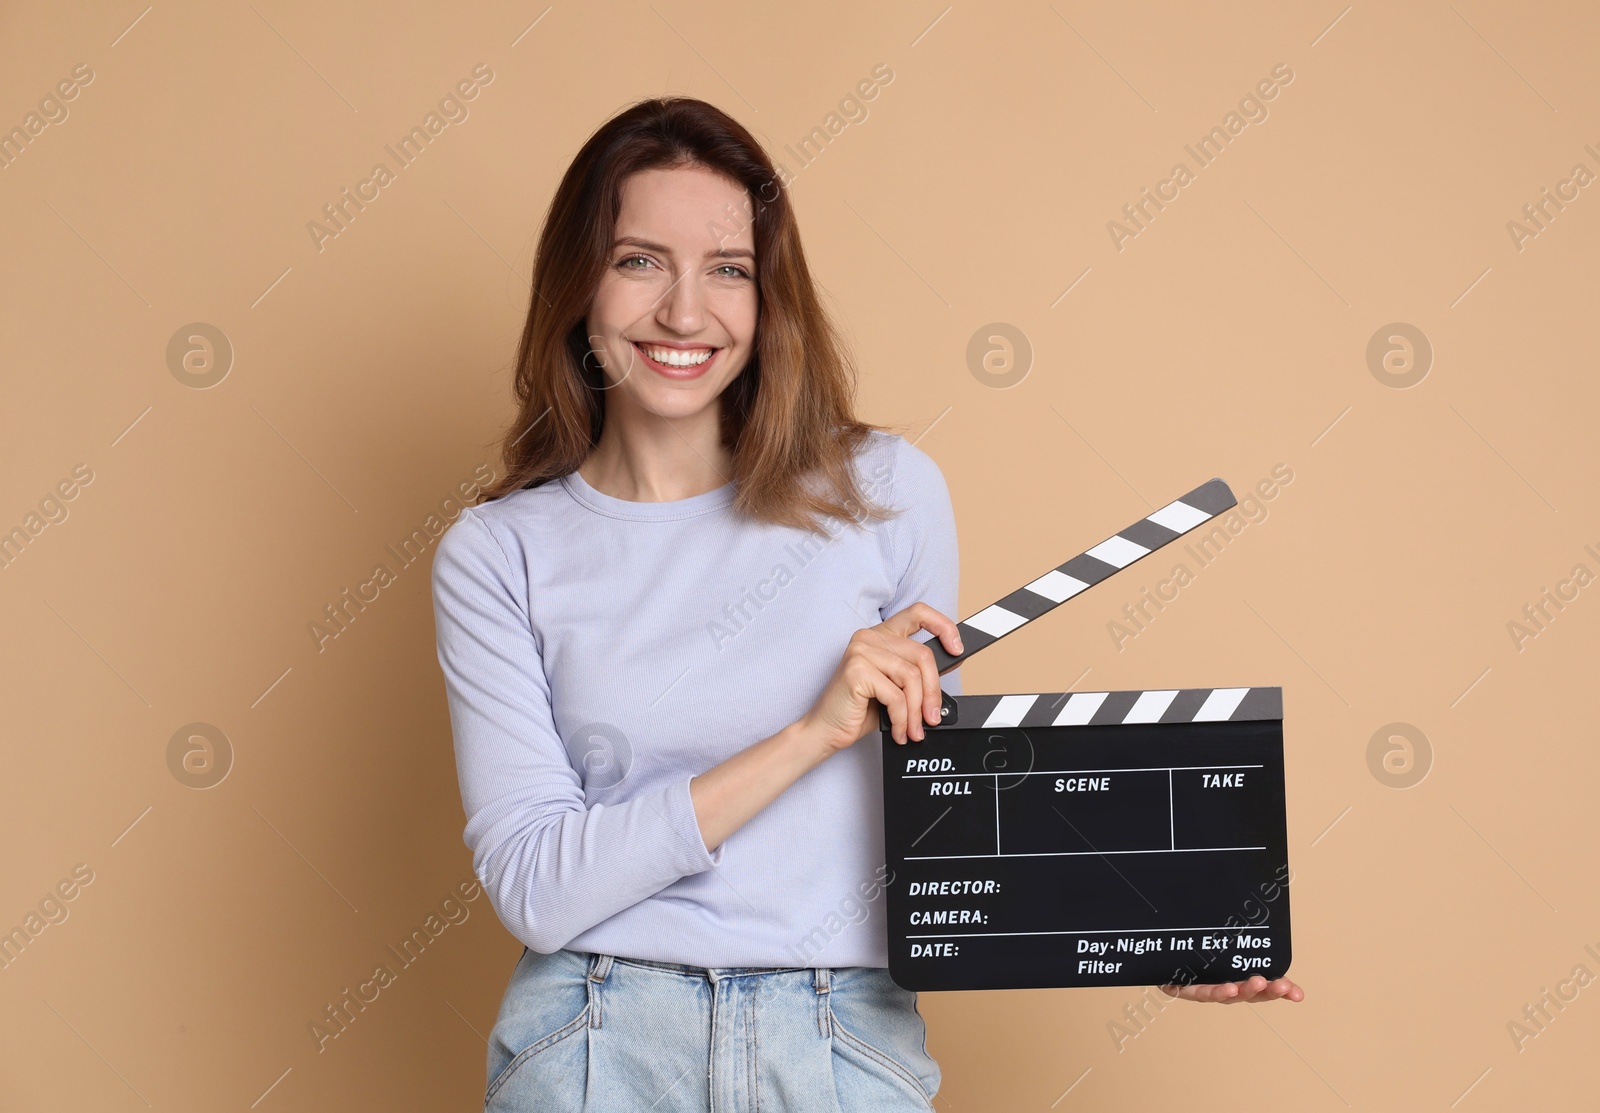 Photo of Making movie. Smiling woman with clapperboard on beige background